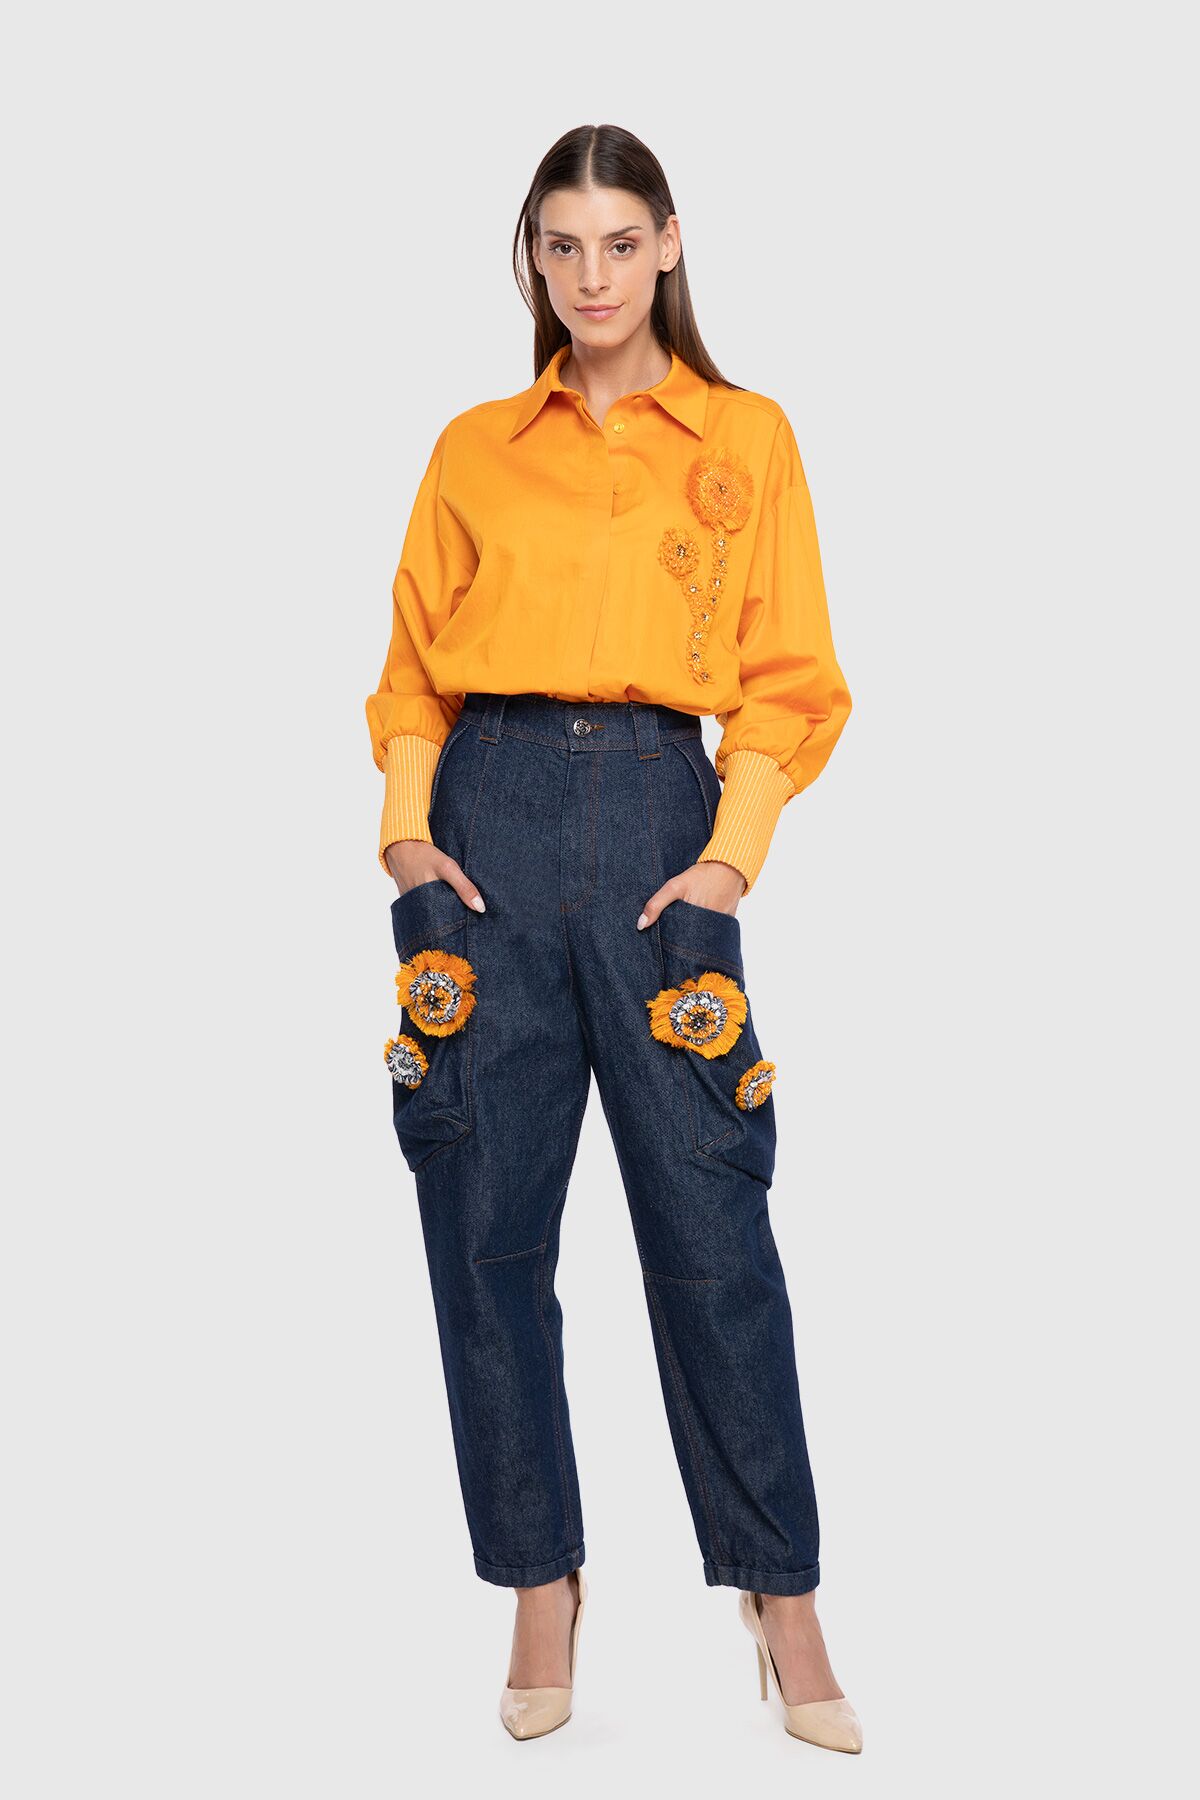  GIZIA - High Waist Slouchy Trousers with Contrast Embroidery Detail